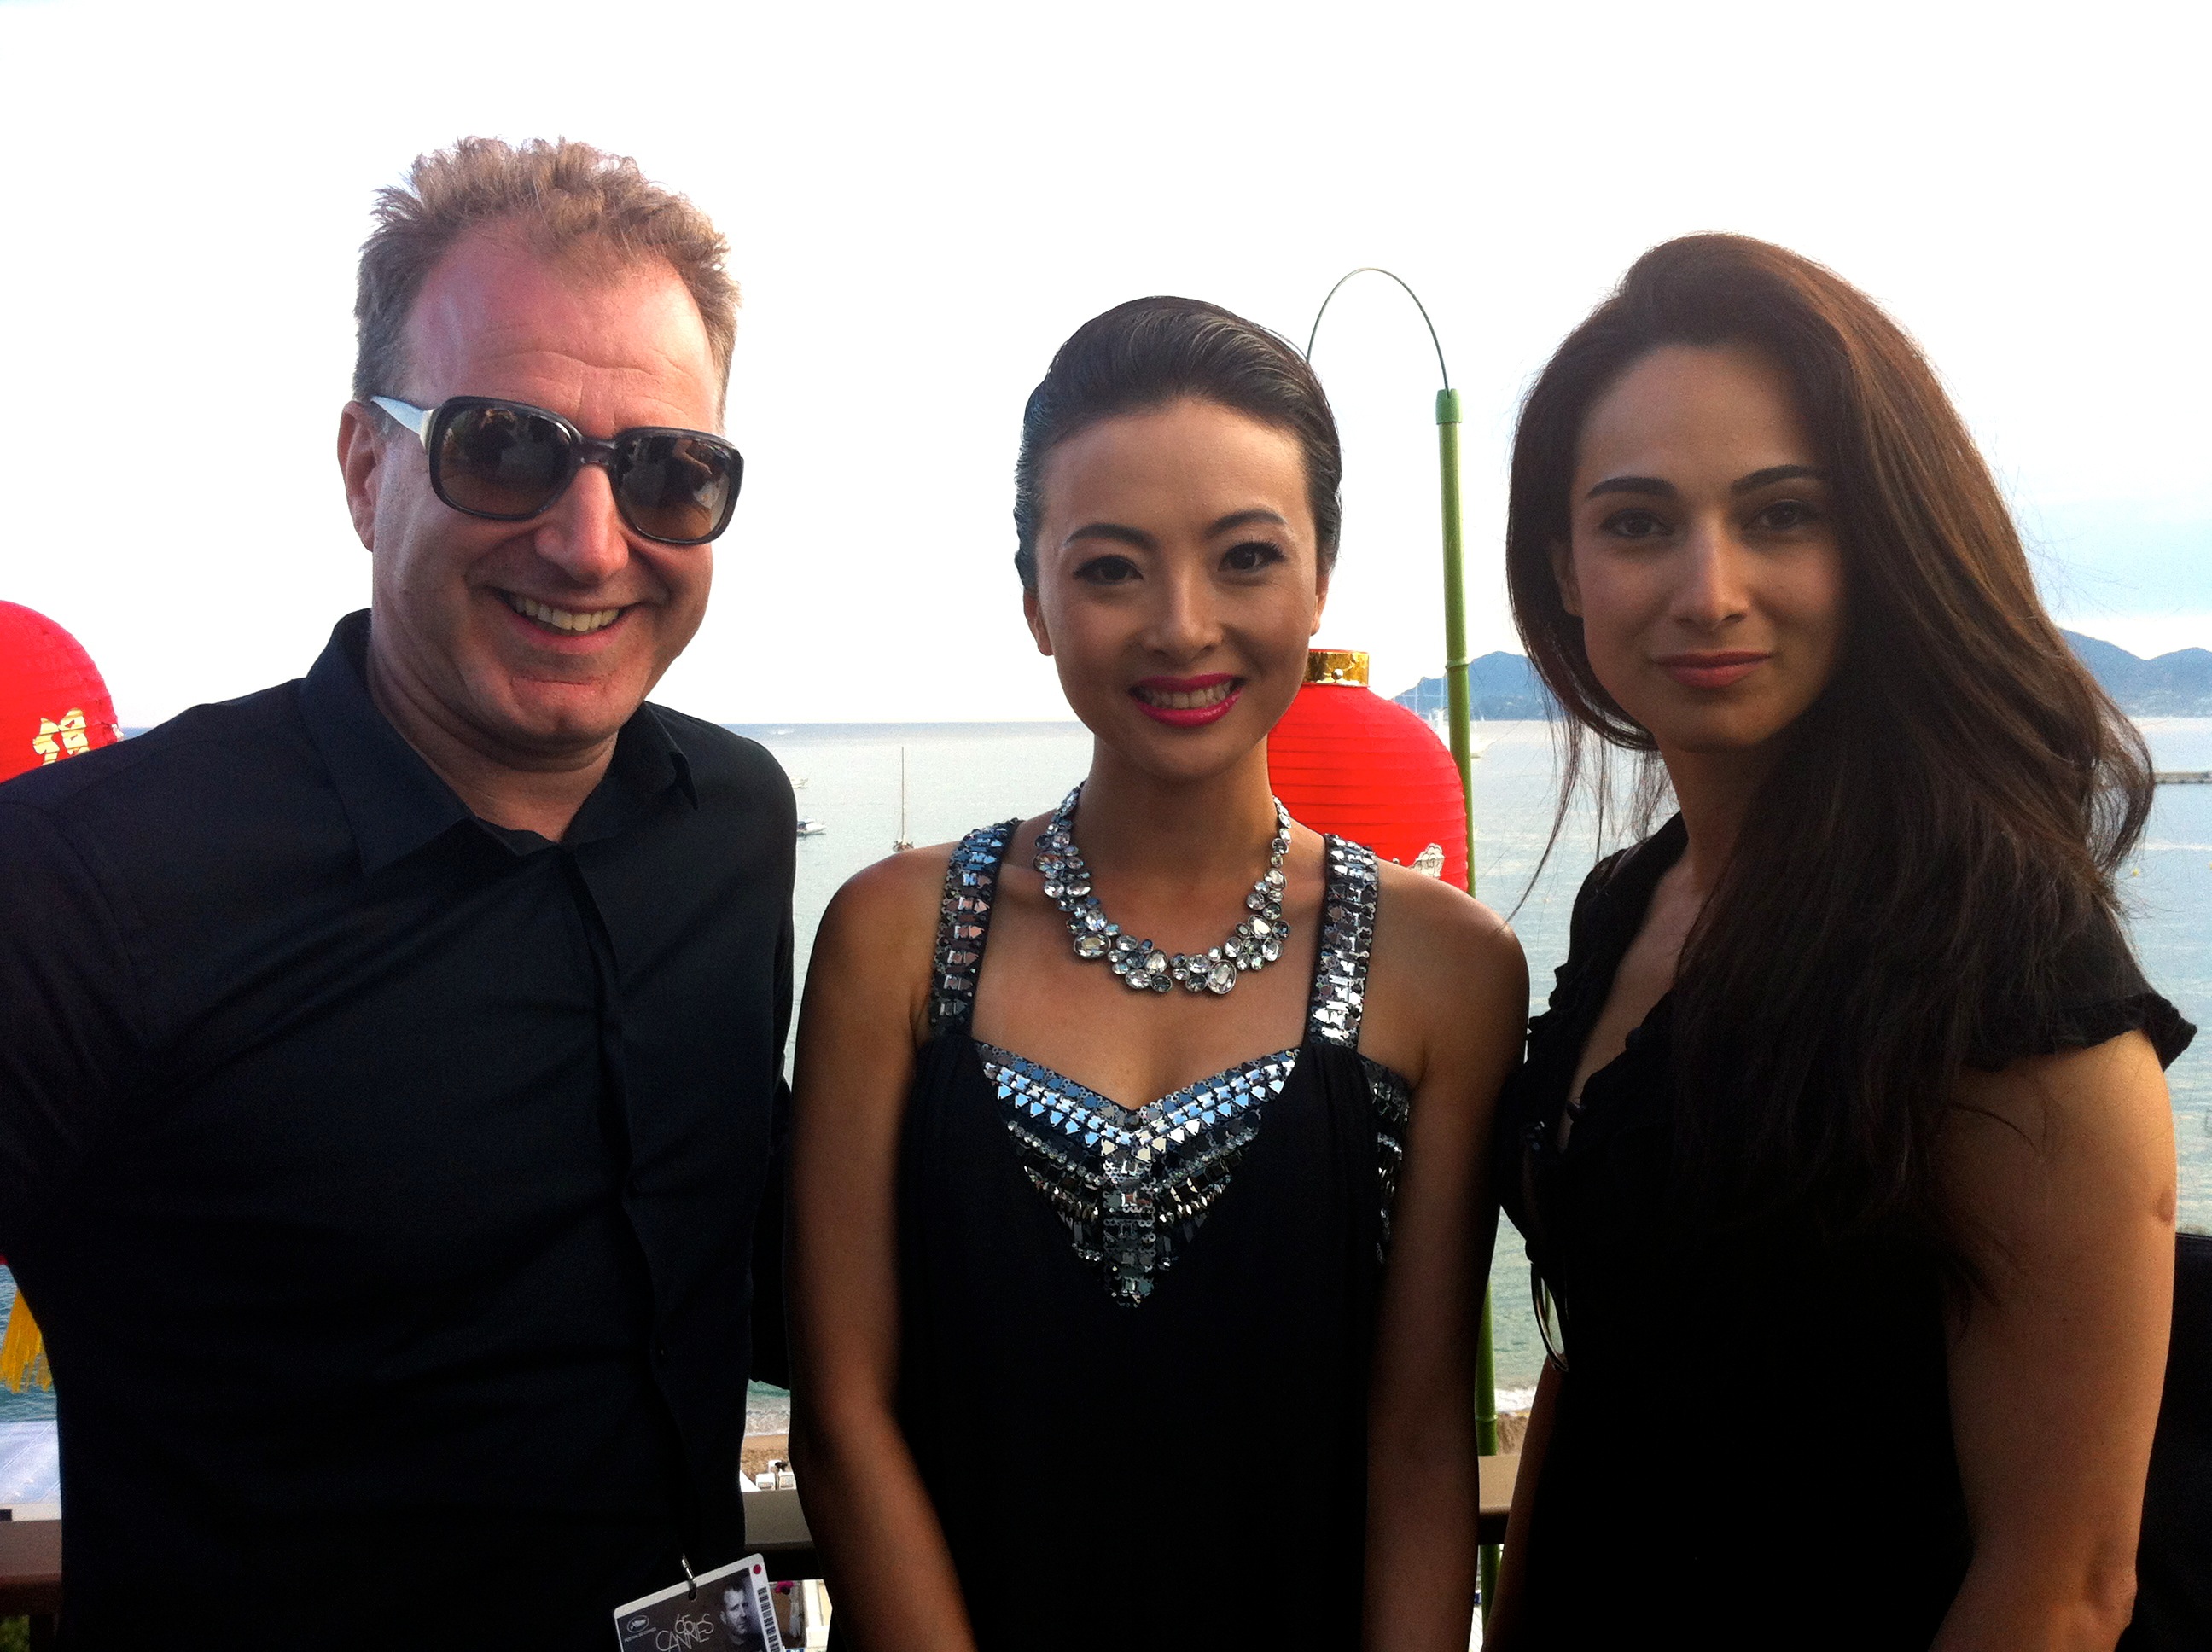 At Cannes 2012 - with Cecilia Cheung and Asli Bayram